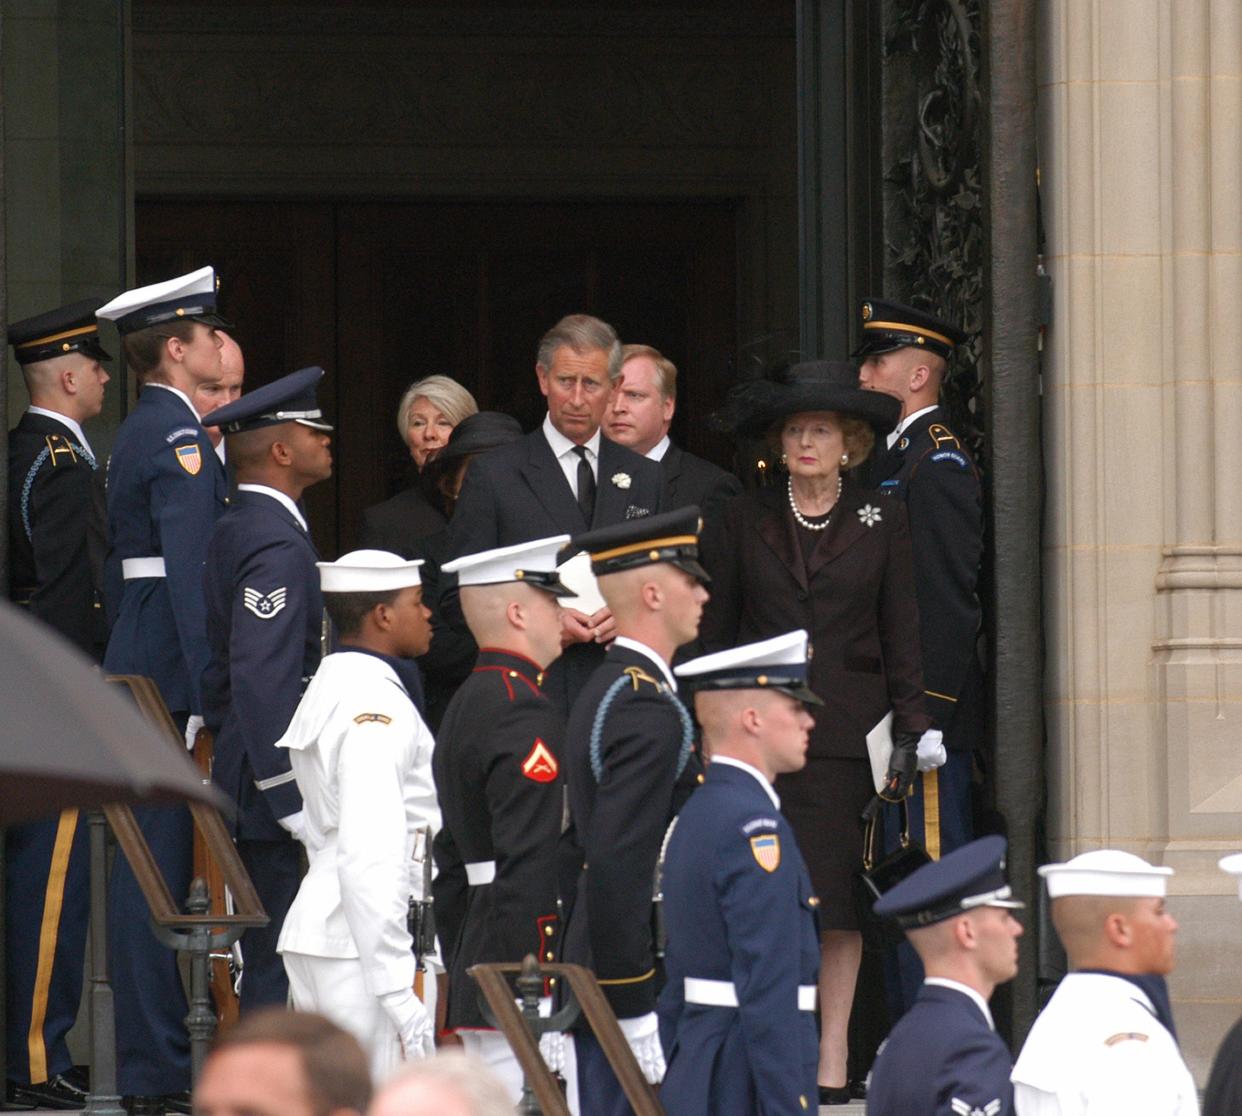 Prince Charles attends Ronald Reagan's funeral in 2004